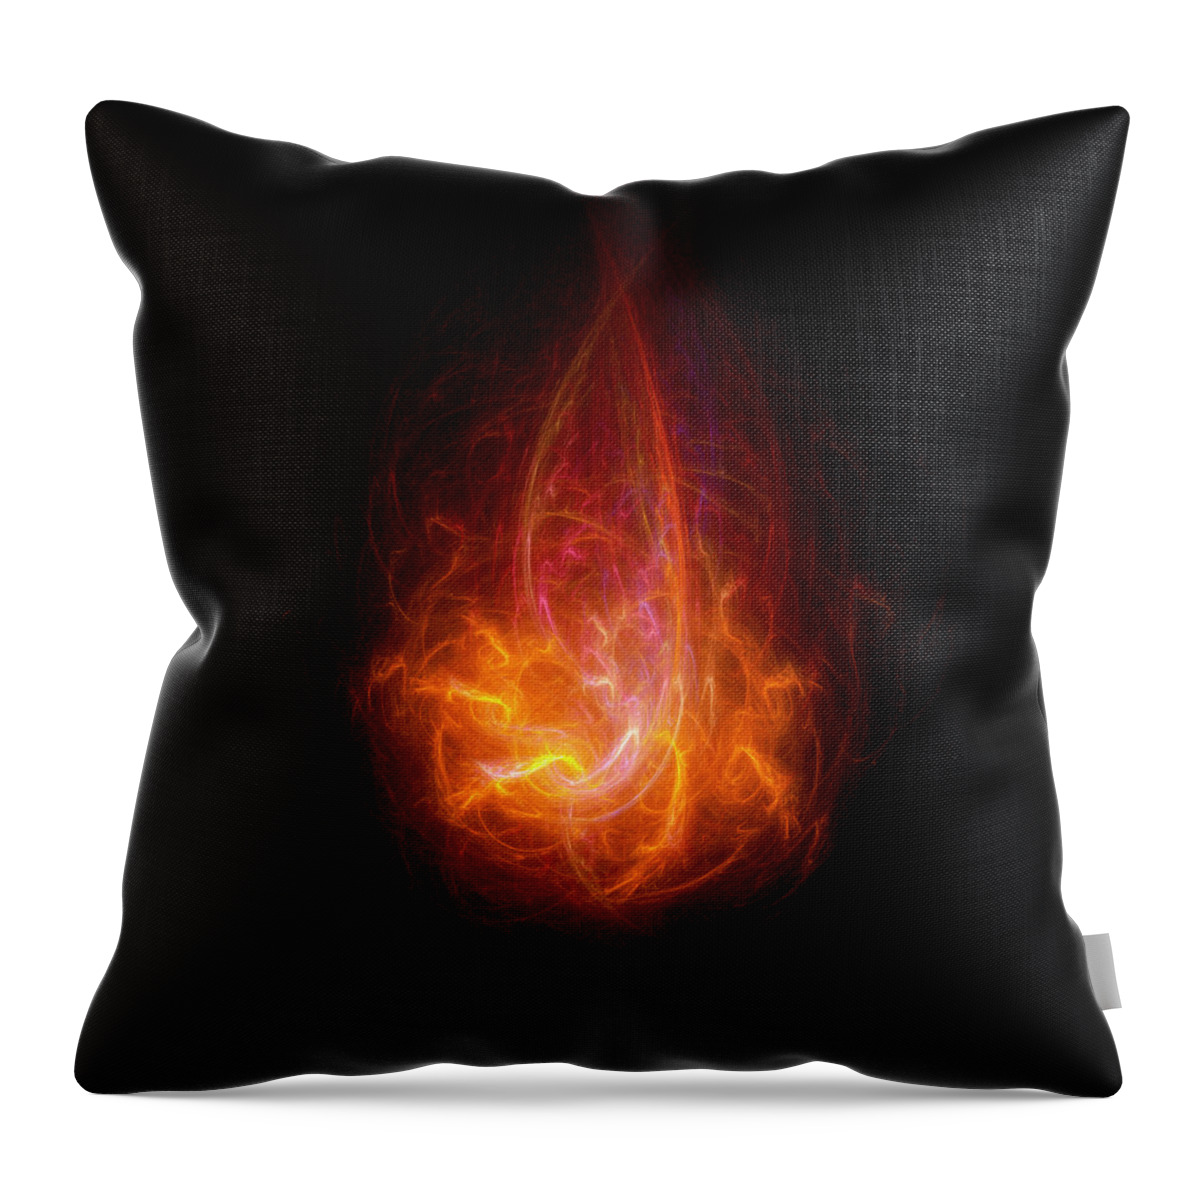 Rick Drent Throw Pillow featuring the digital art Red Flame by Rick Drent